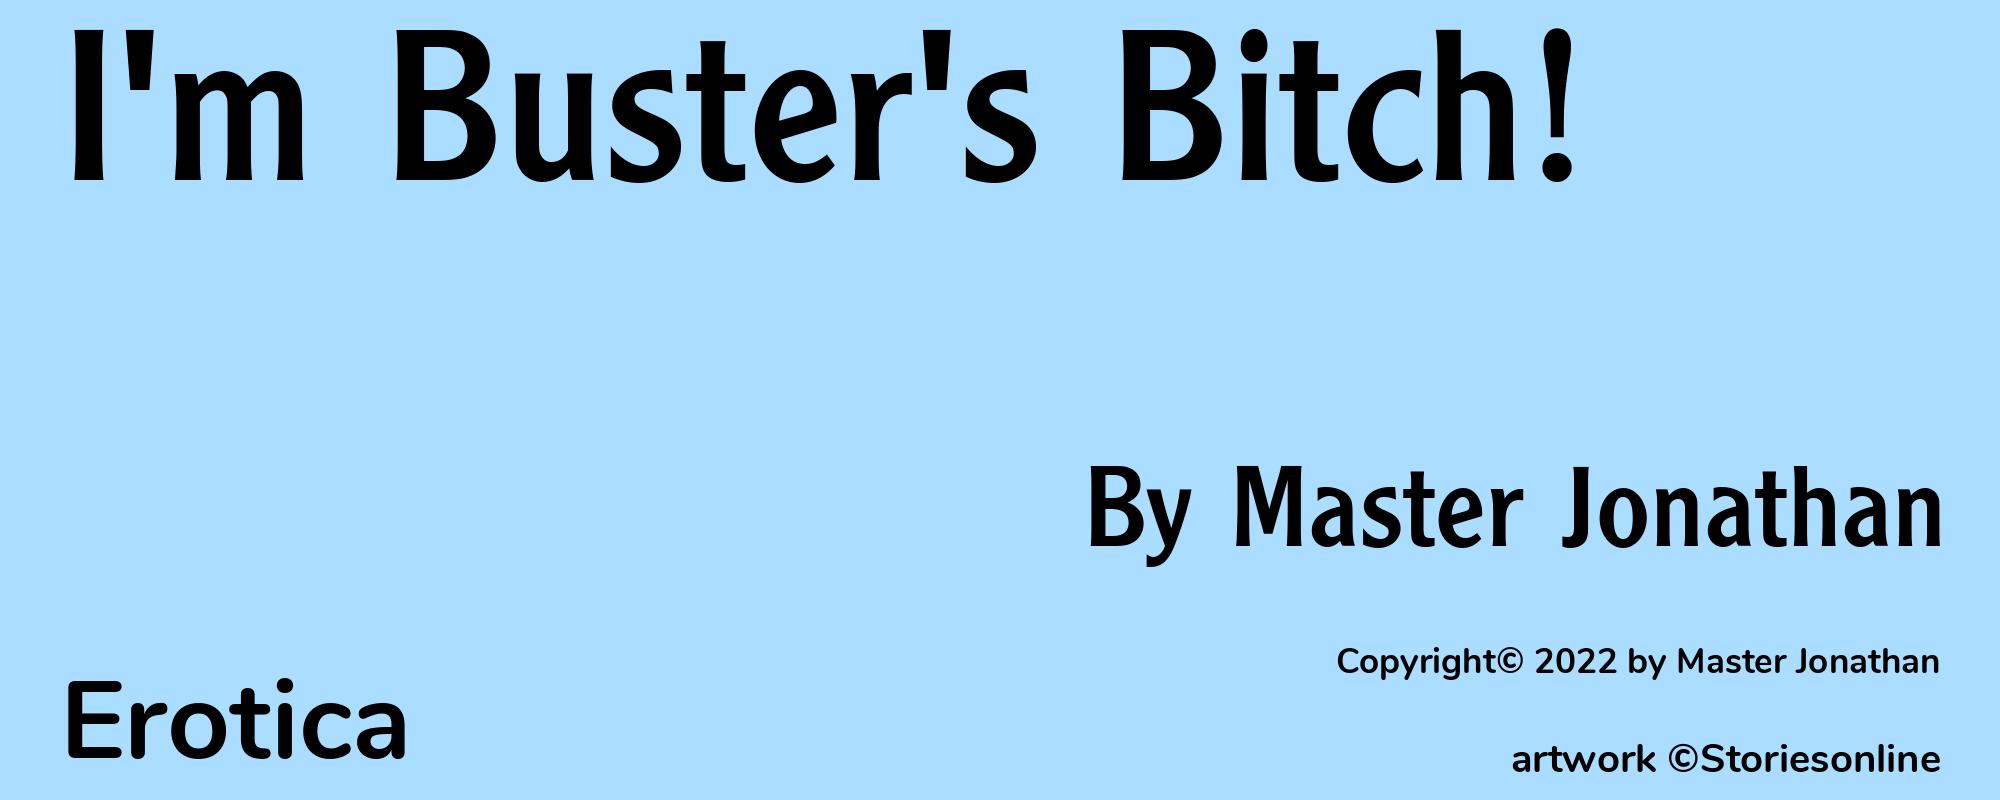 I'm Buster's Bitch! - Cover